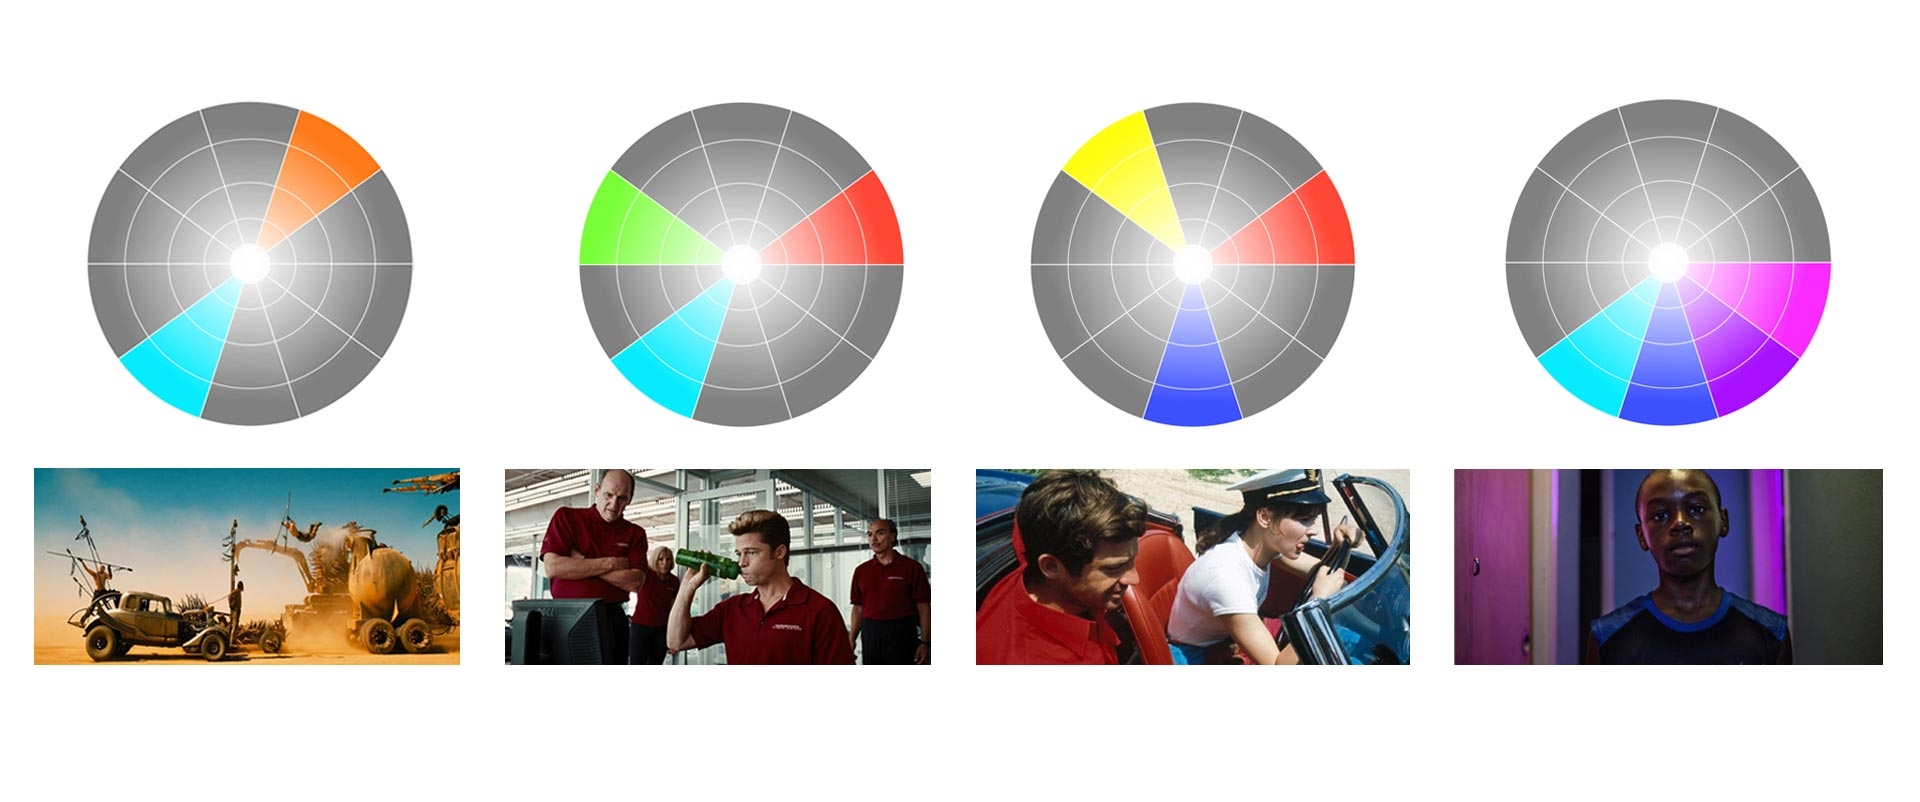 10 Colour Palettes to Give Your Video a Filmic Look | DeviceDaily.com